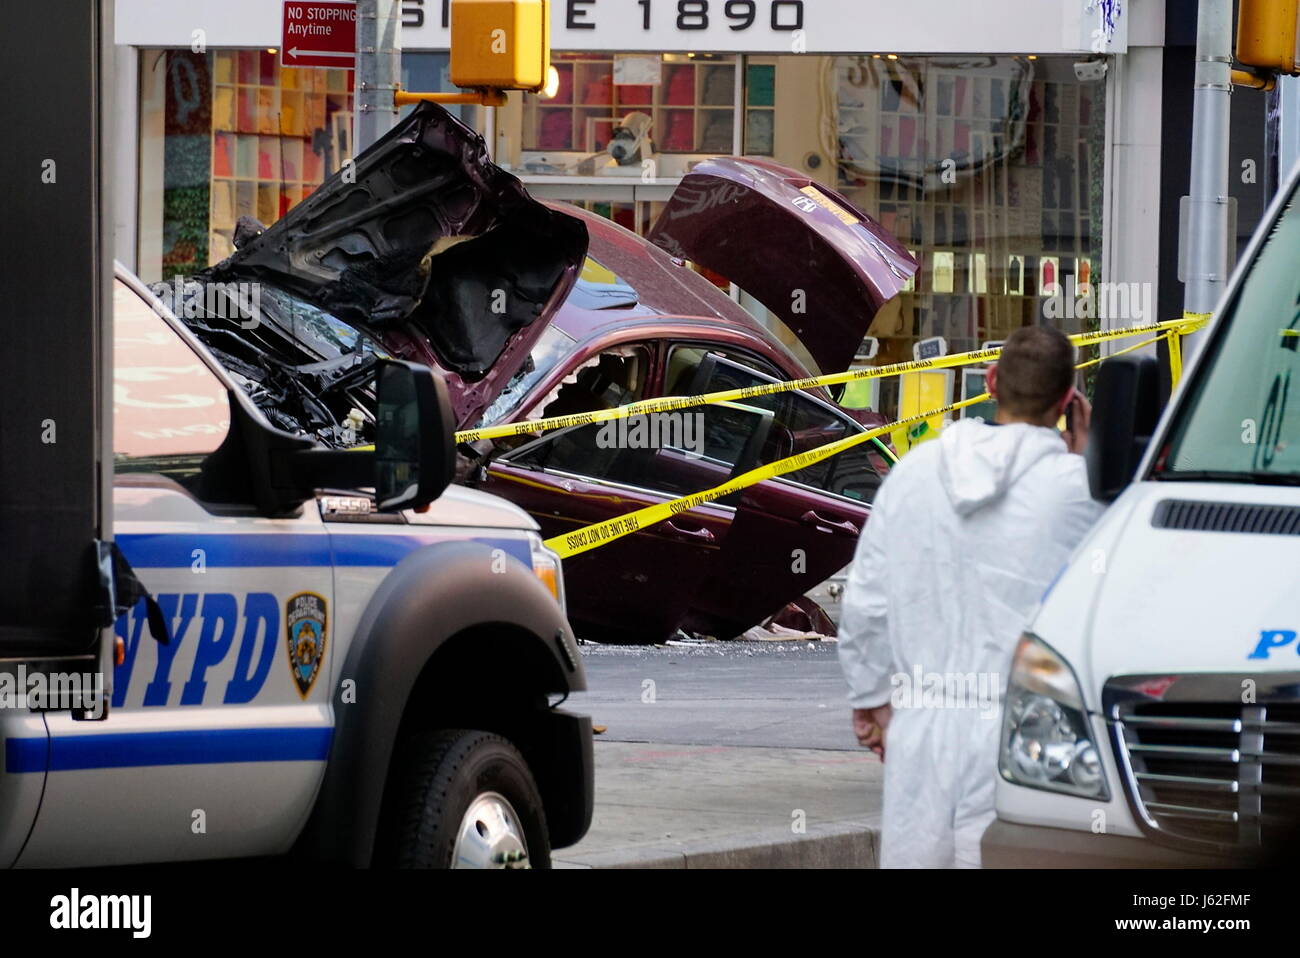 New York, New York, USA. 18th May, 2017. Police officers and emergency workers investigate the scene of a car crash in Times Square that took the life of an 18 year-old Michigan girl and injured 22 others. Credit: Kevin C. Downs/ZUMA Wire/ZUMAPRESS.com/Alamy Live News Stock Photo